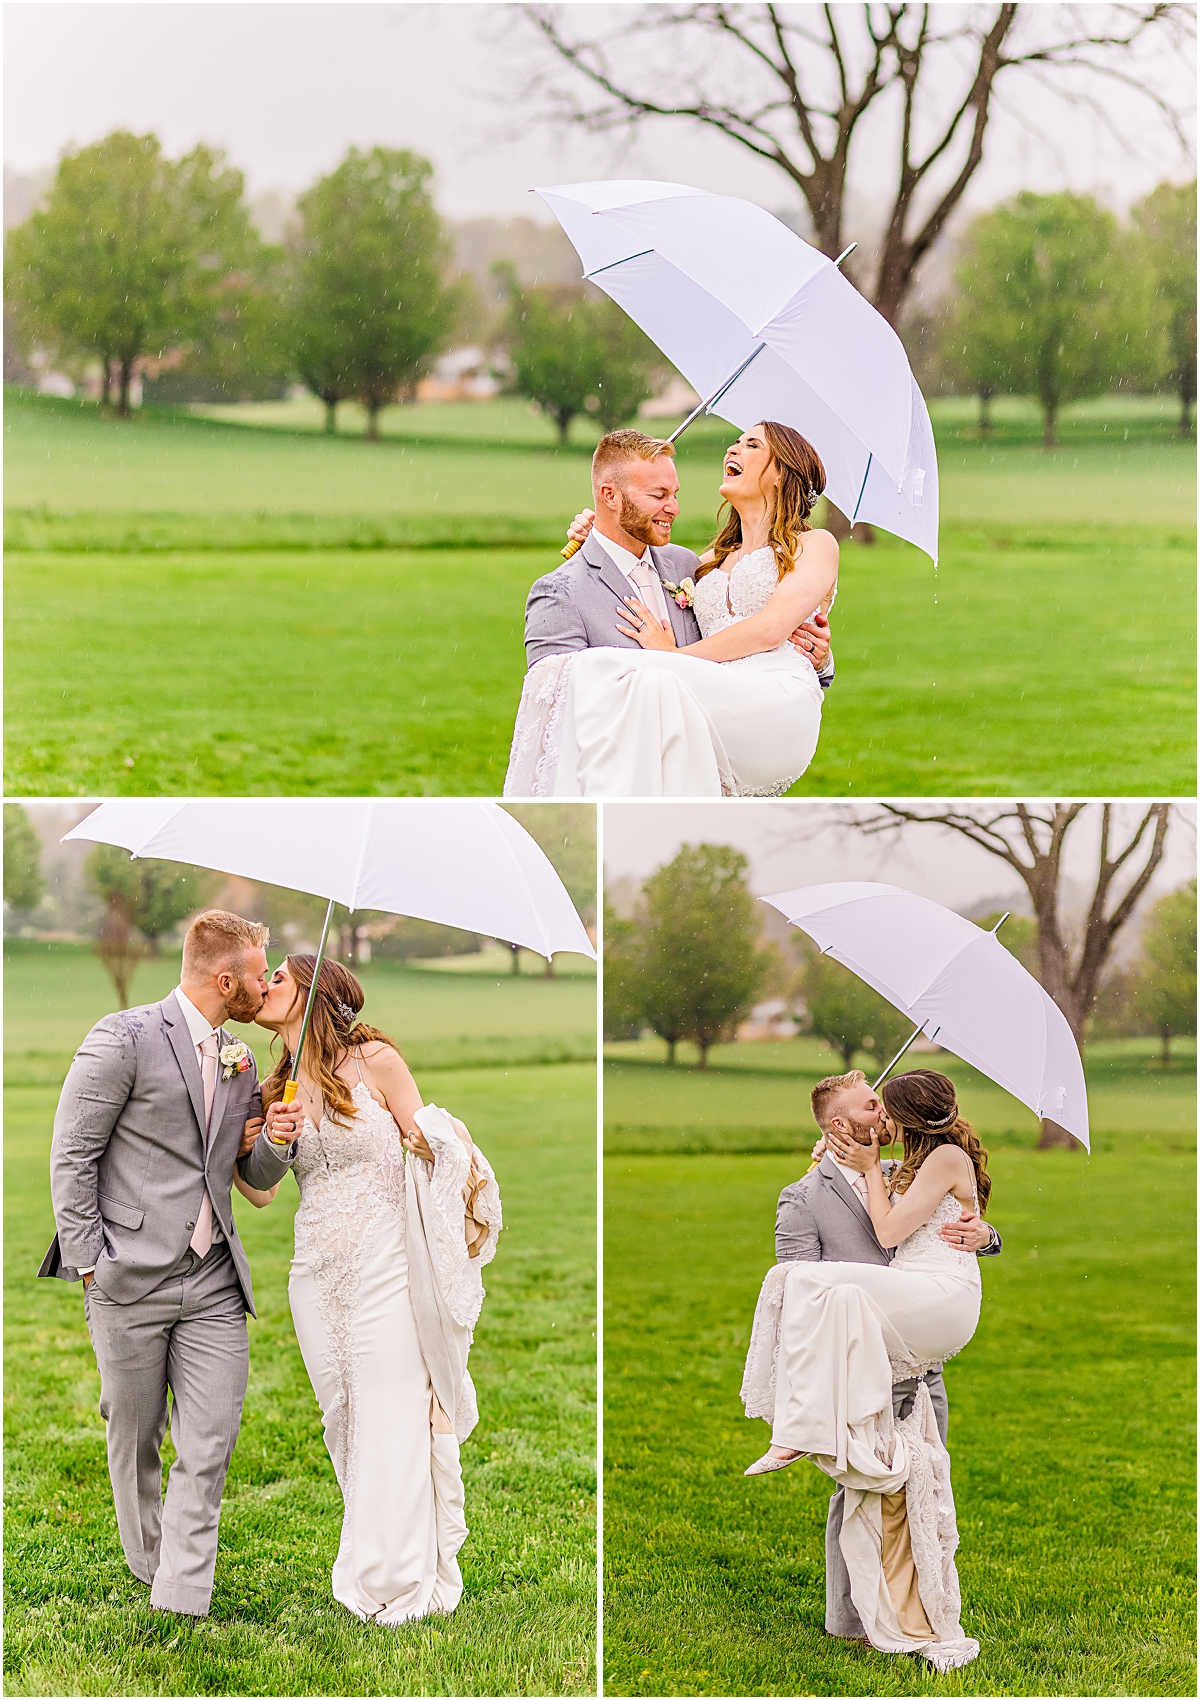 Collage of Zach and Ashleigh posing in the rain